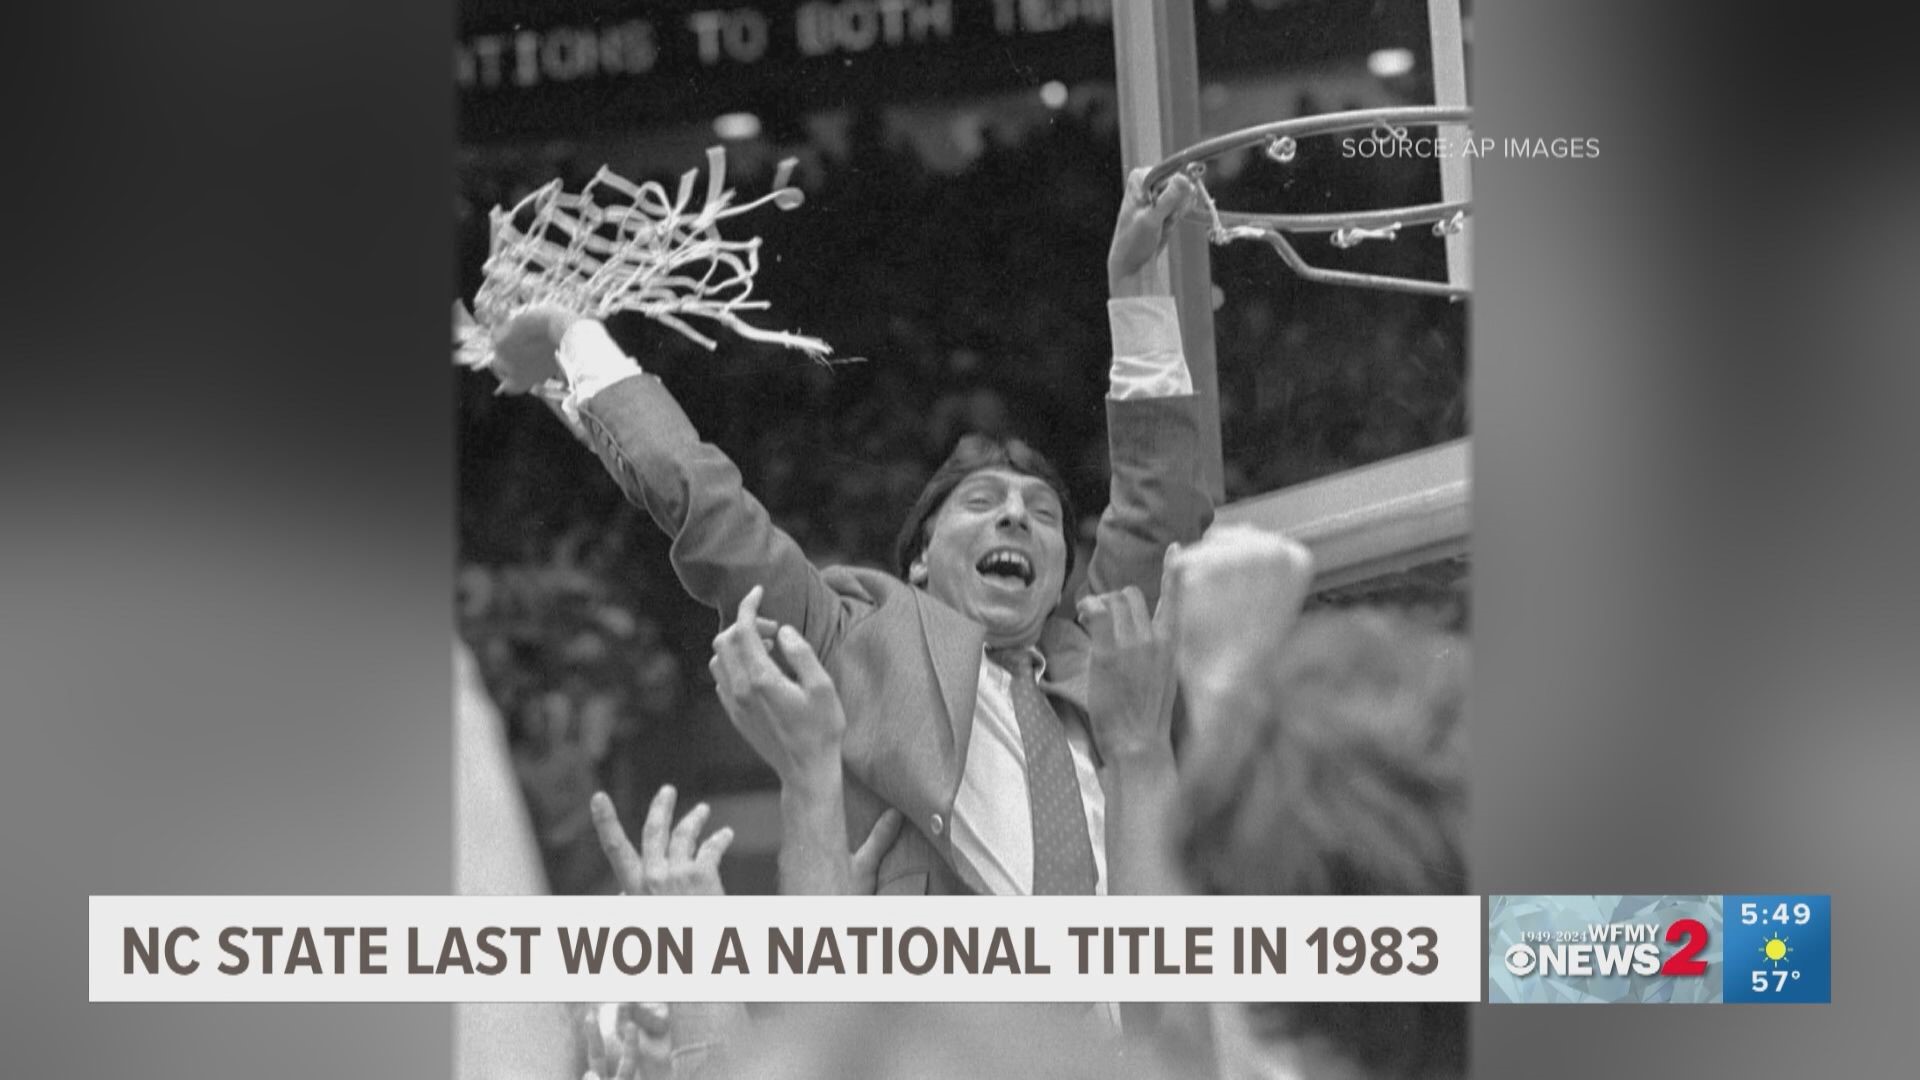 Three North Carolina teams make it to the Sweet 16, a deeper dive into their March Madness history.